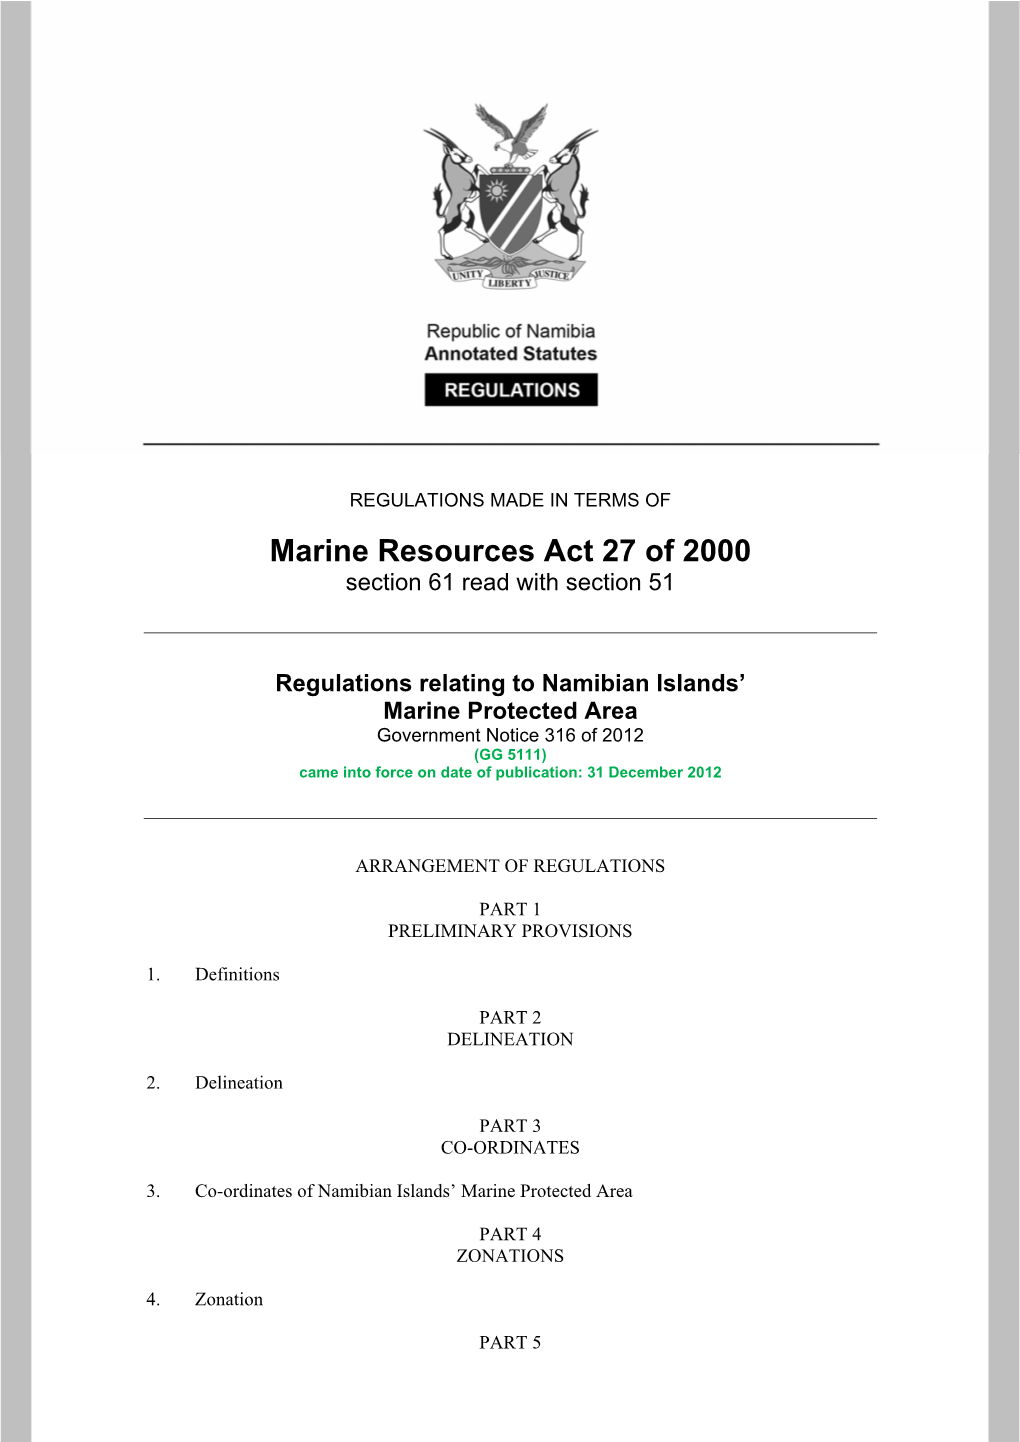 Marine Resources Act 27 of 2000 Section 61 Read with Section 51